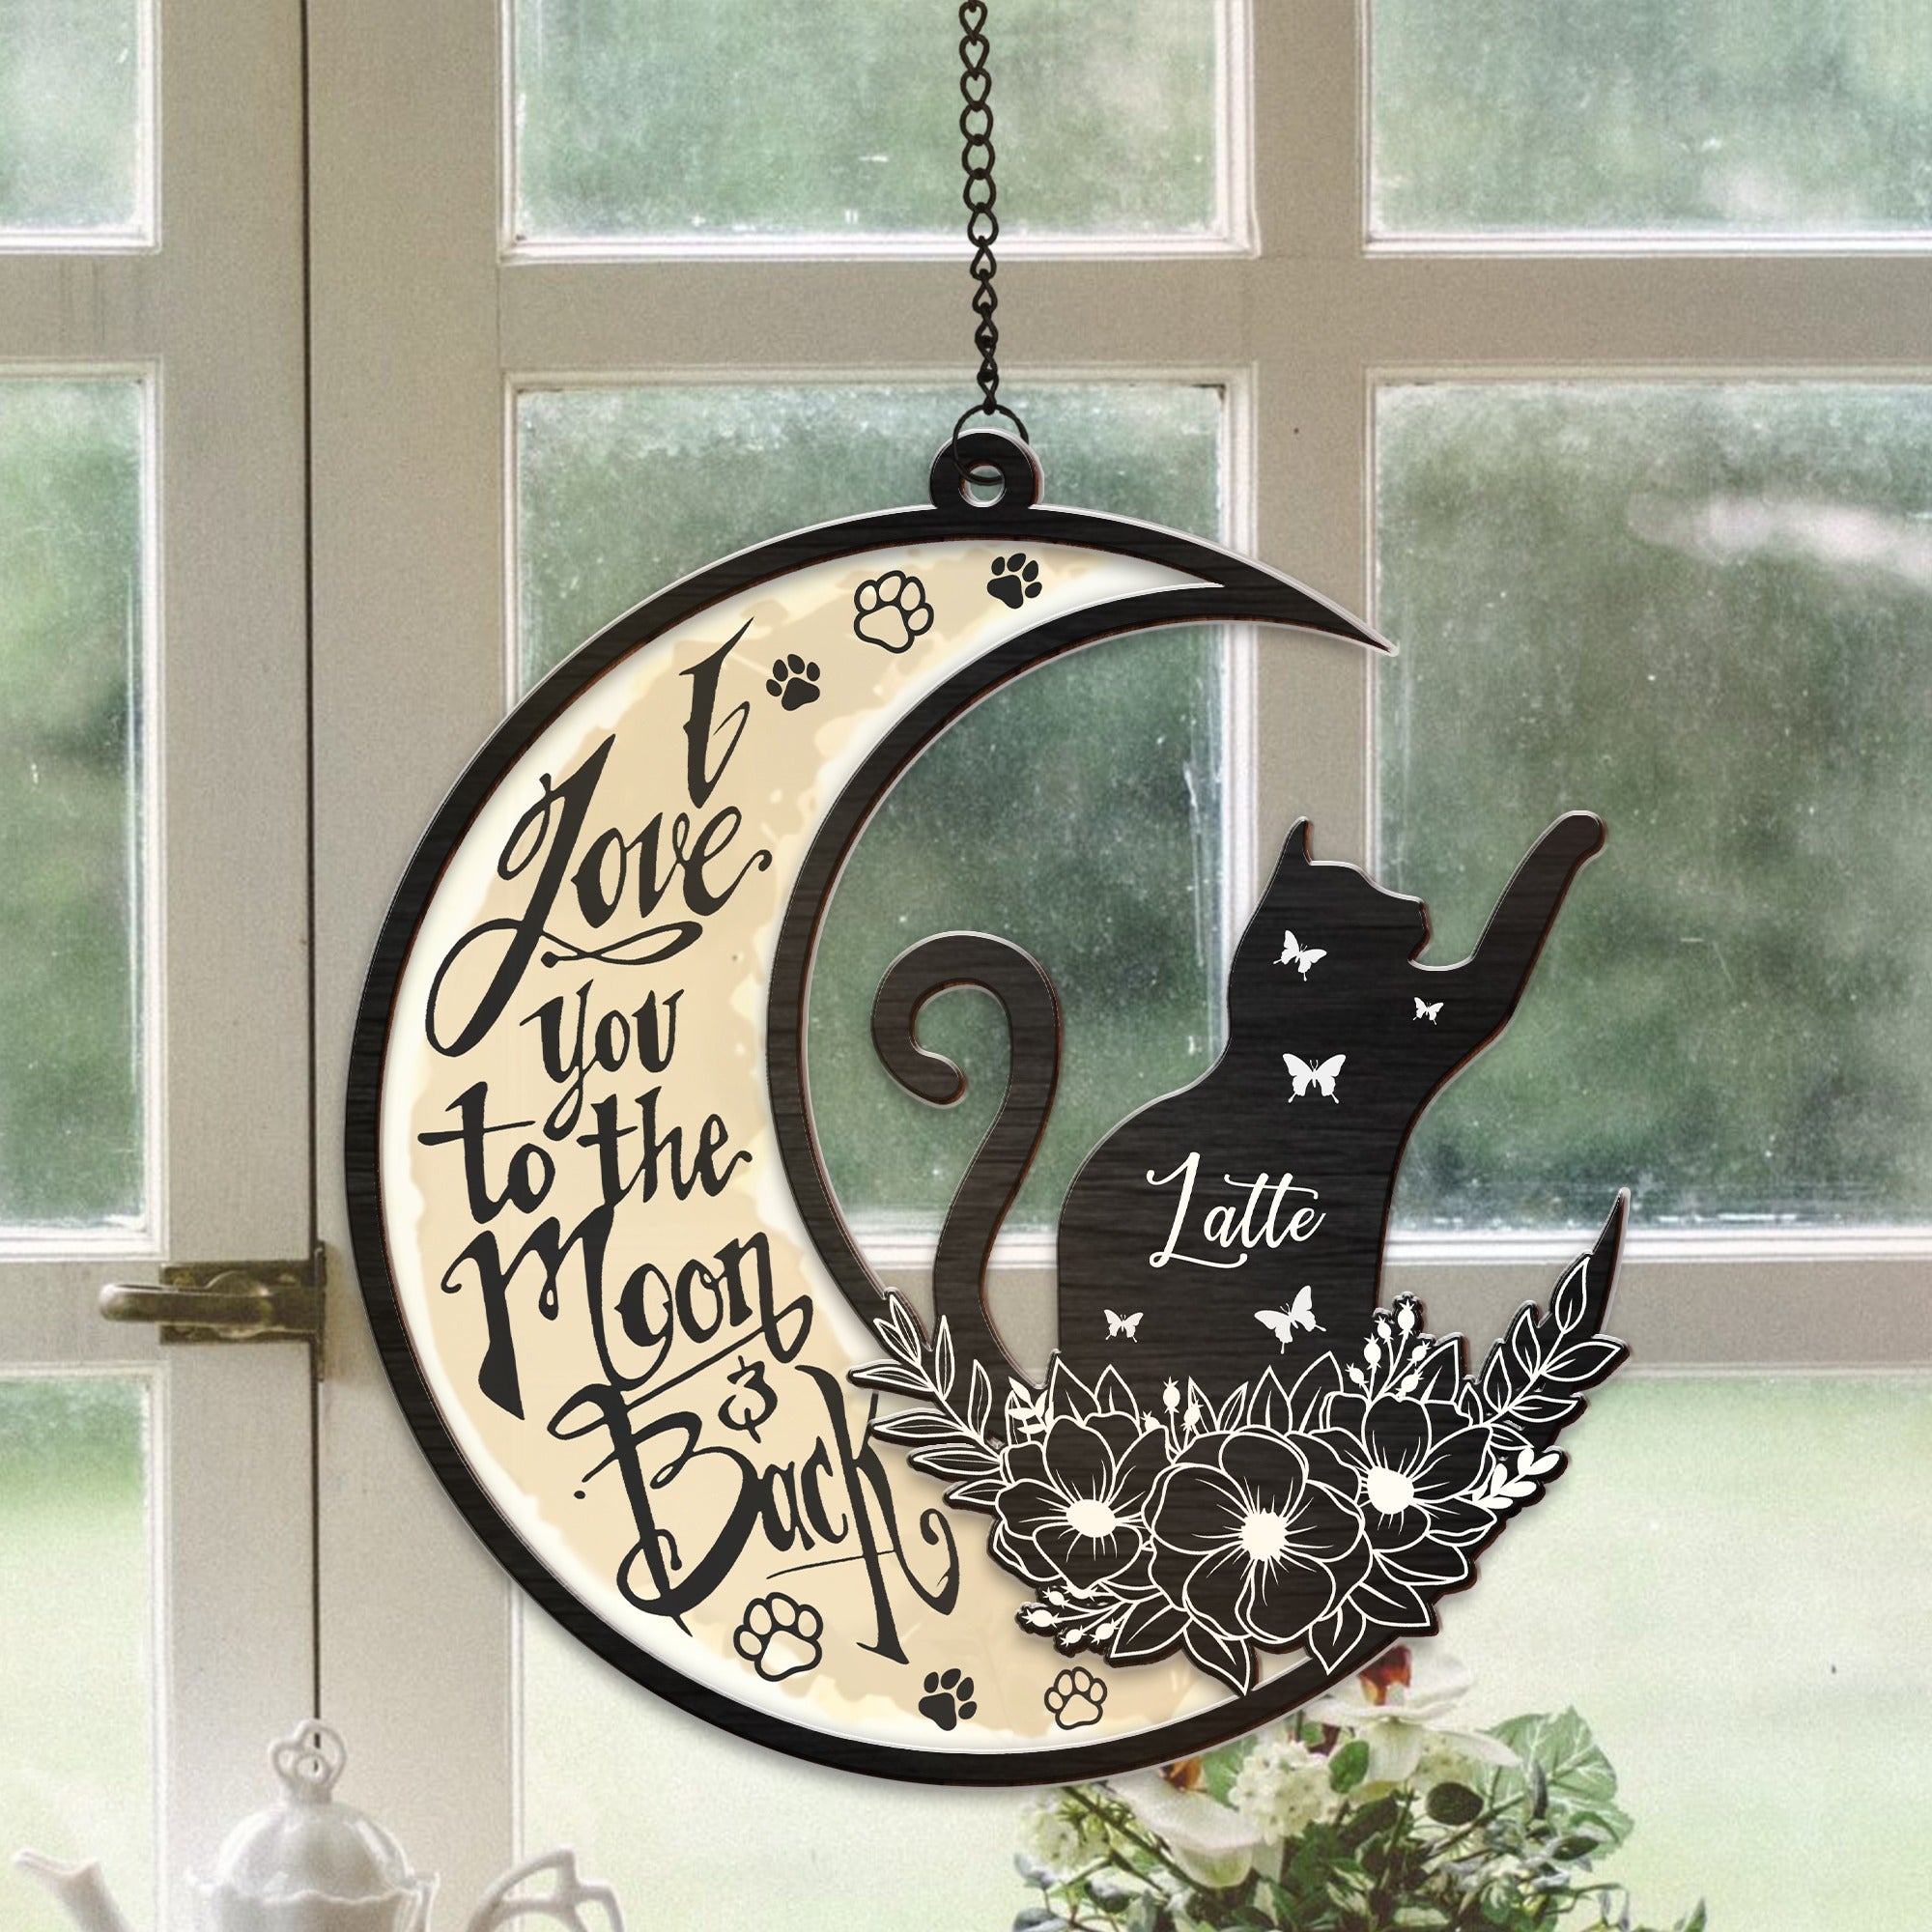 Personalized Black Cat I Love You To The Moon And Back Hanging Suncatcher Ornament